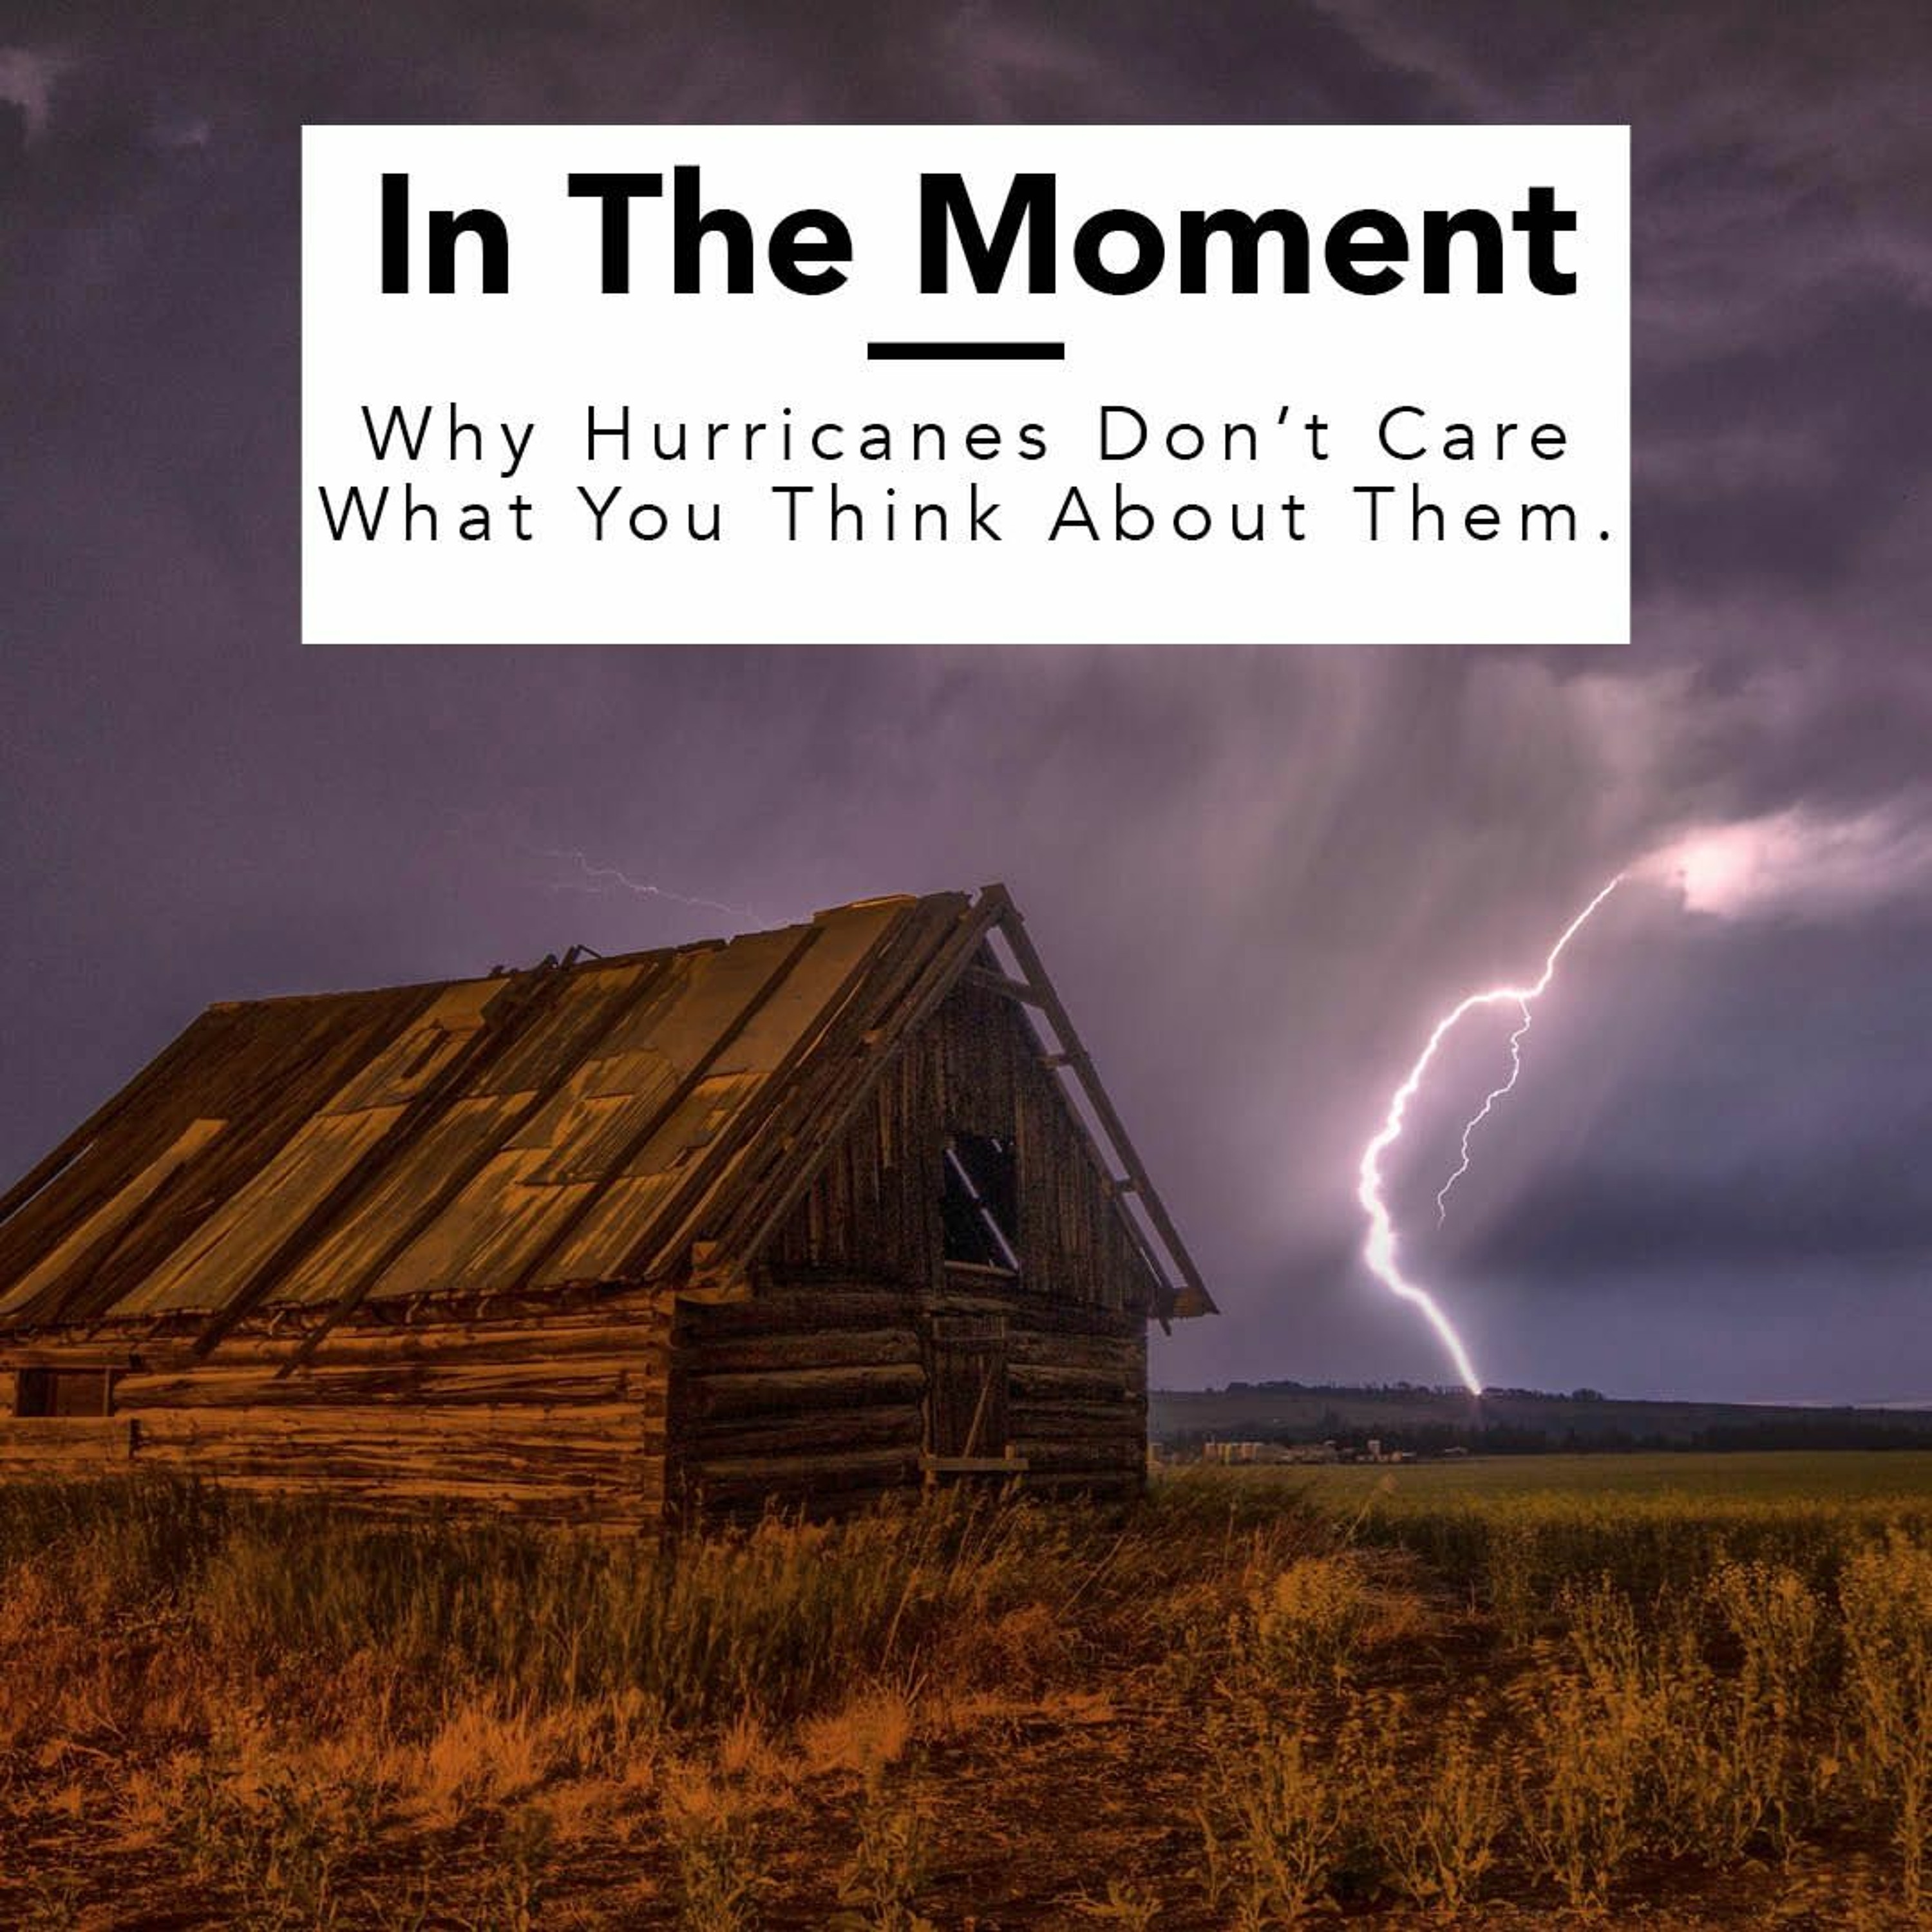 Why Hurricanes Don't Care What You Think About Them.